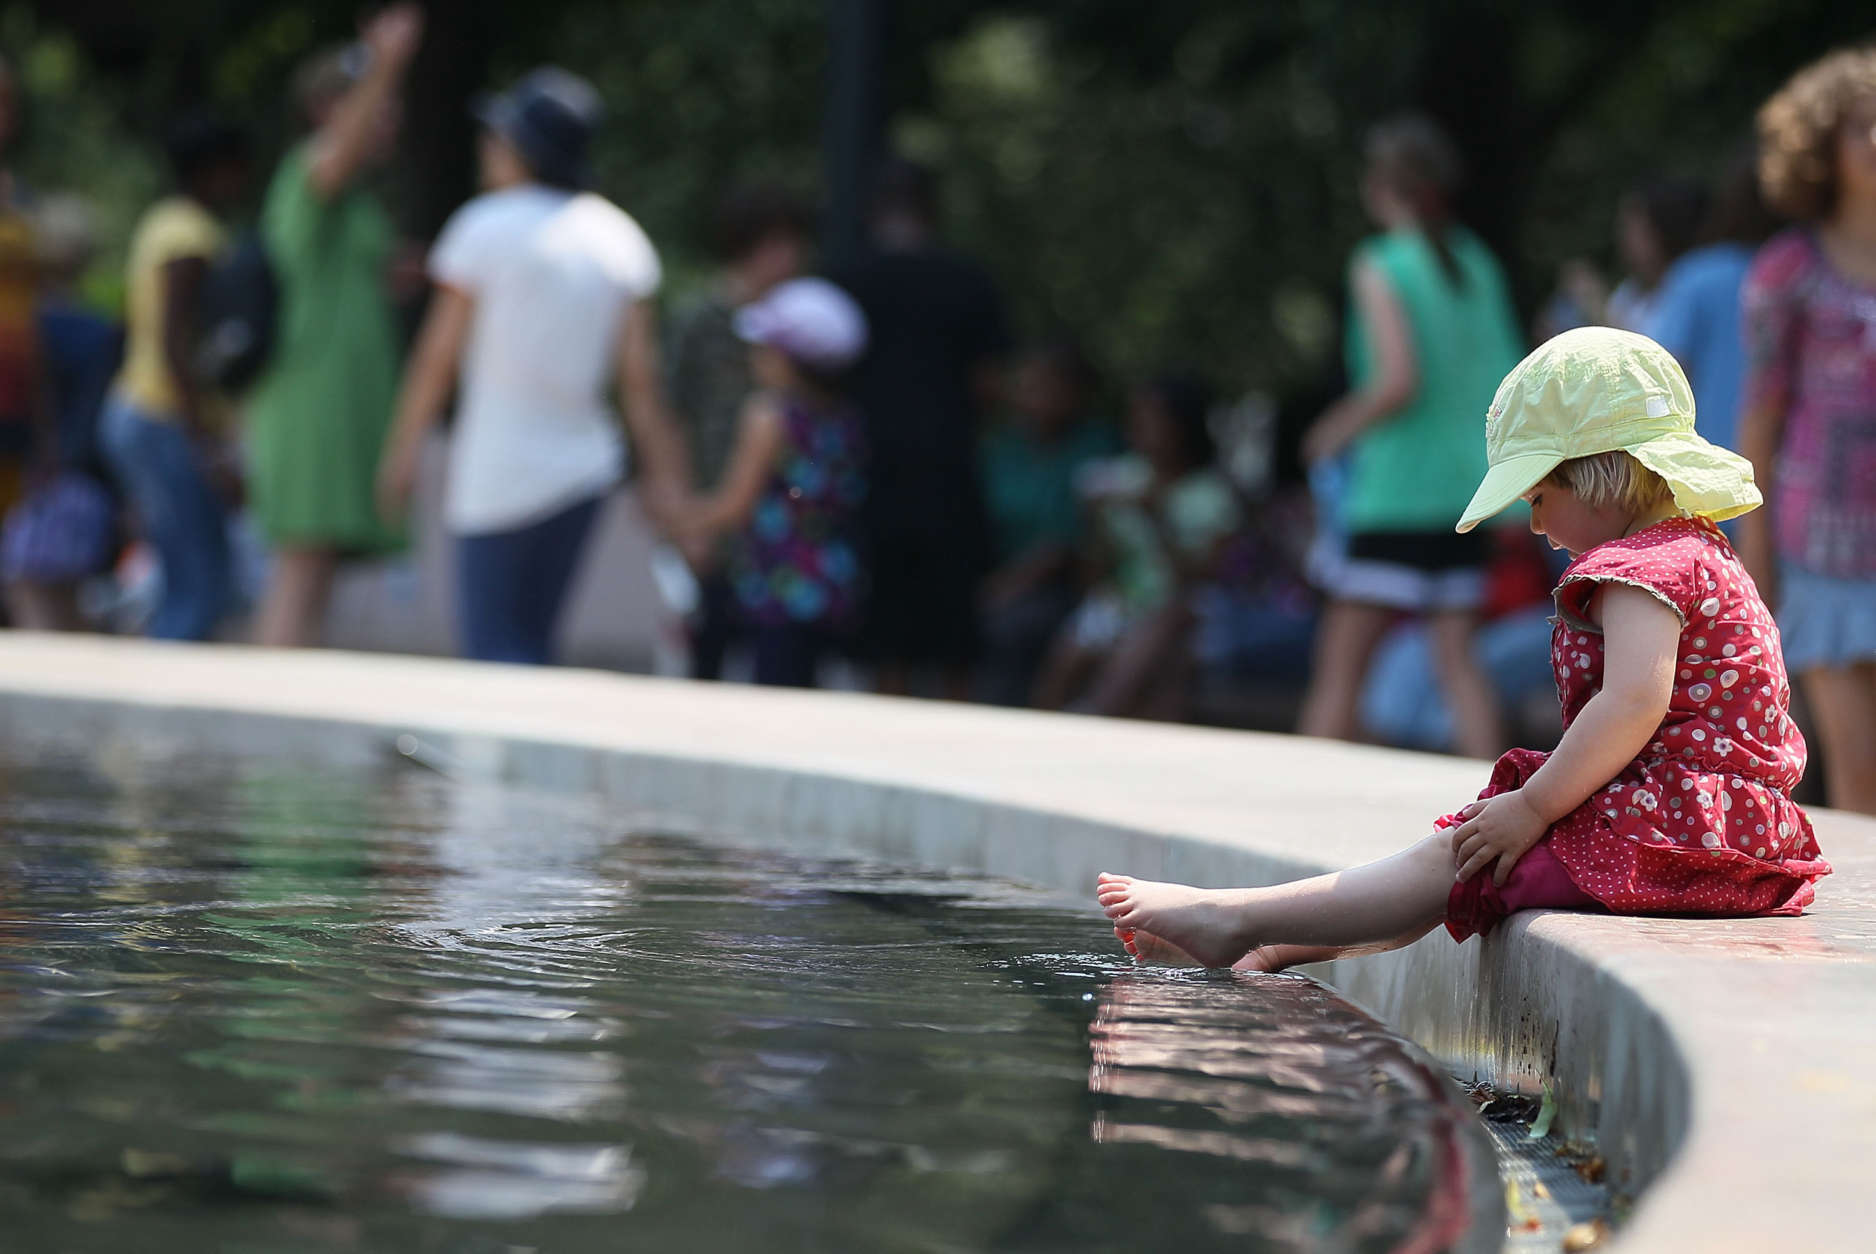 WASHINGTON, DC - JUNE 09:  Ronja Lerche, 2, of Erfurt, Germany, puts her feet in the fountain at the National Gallery of Art Sculpture Garden, on June 9, 2011 in Washington, DC. A heat advisory is in effect for the Washington area, and temperatures are expected to be in the middle to upper 90s this afternoon.  (Photo by Mark Wilson/Getty Images)